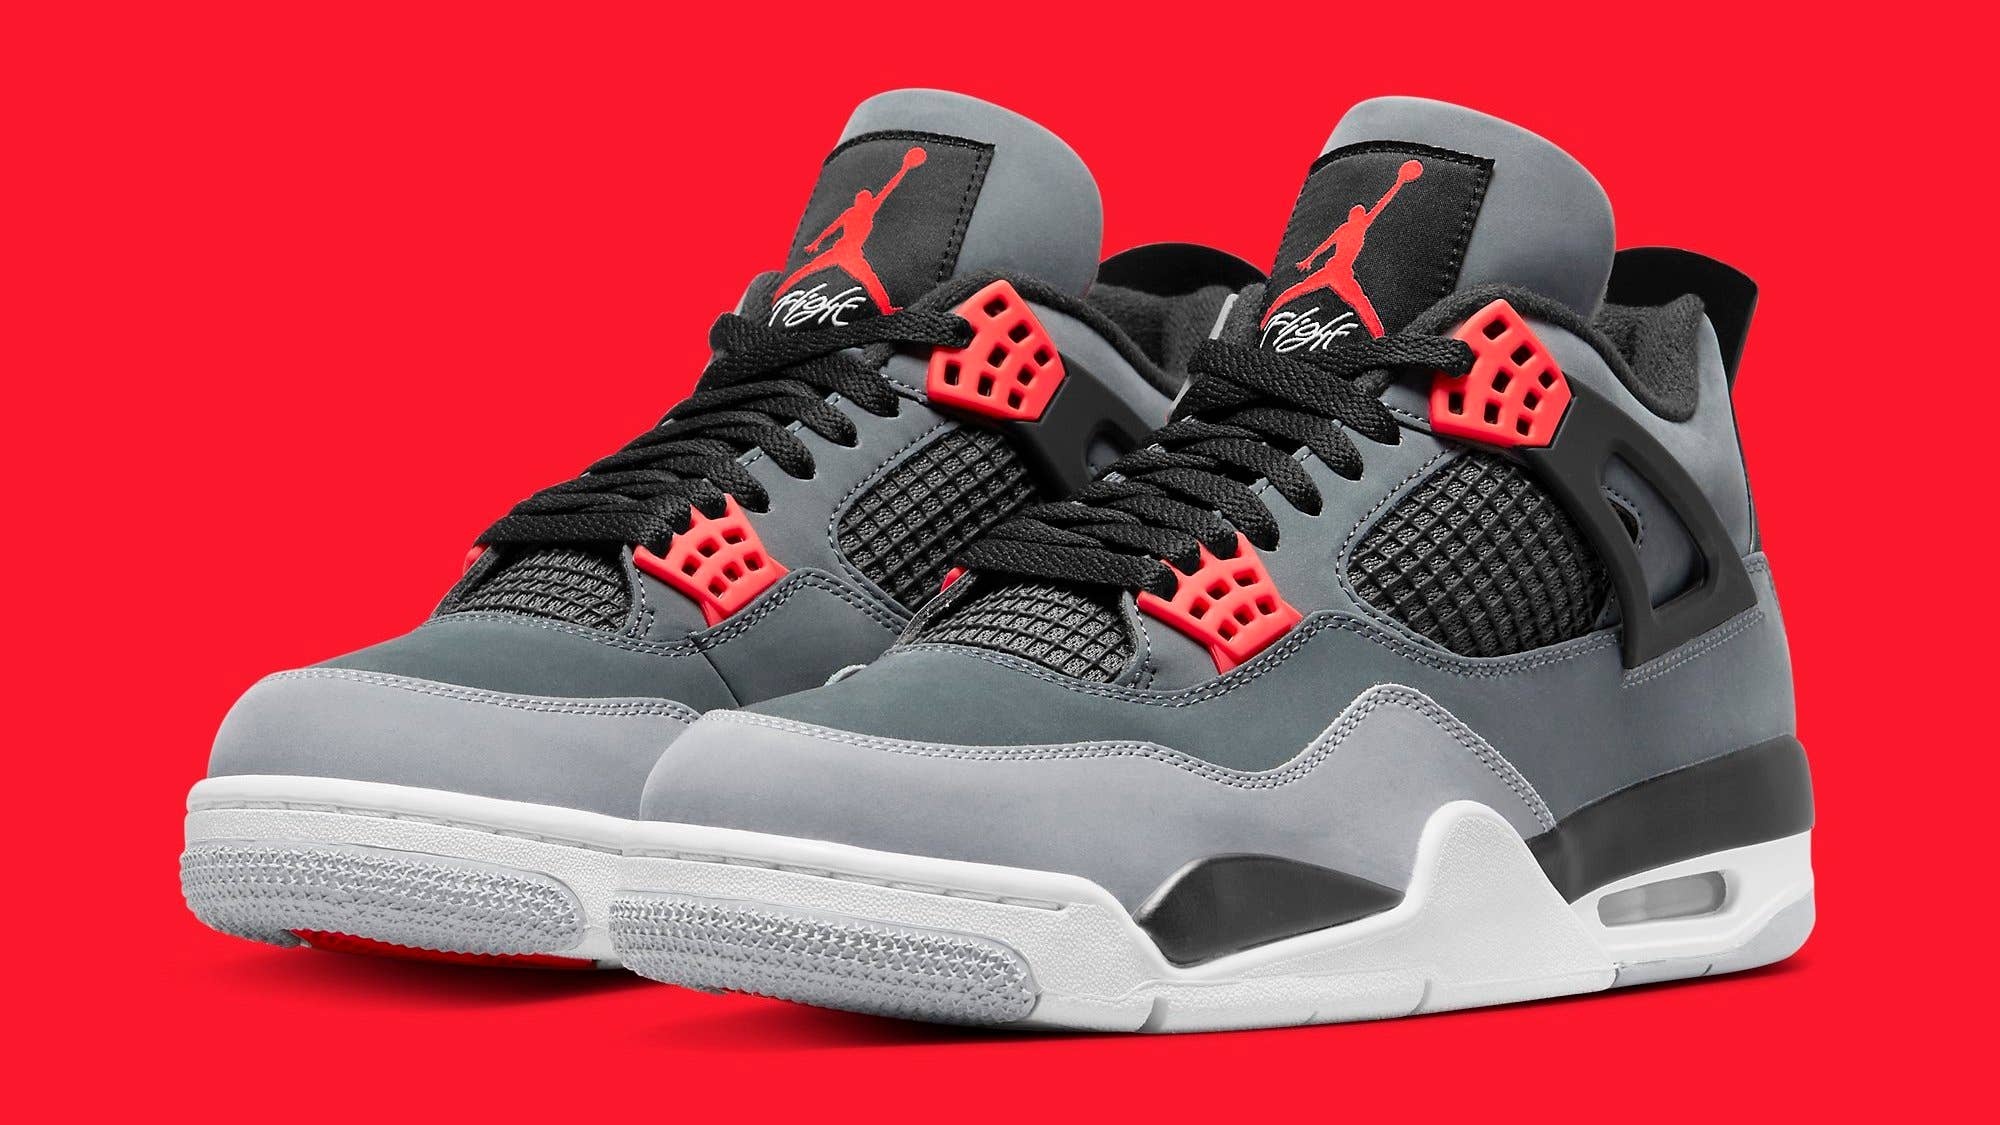 Infrared' Air Jordan 4s Are Officially Releasing in June